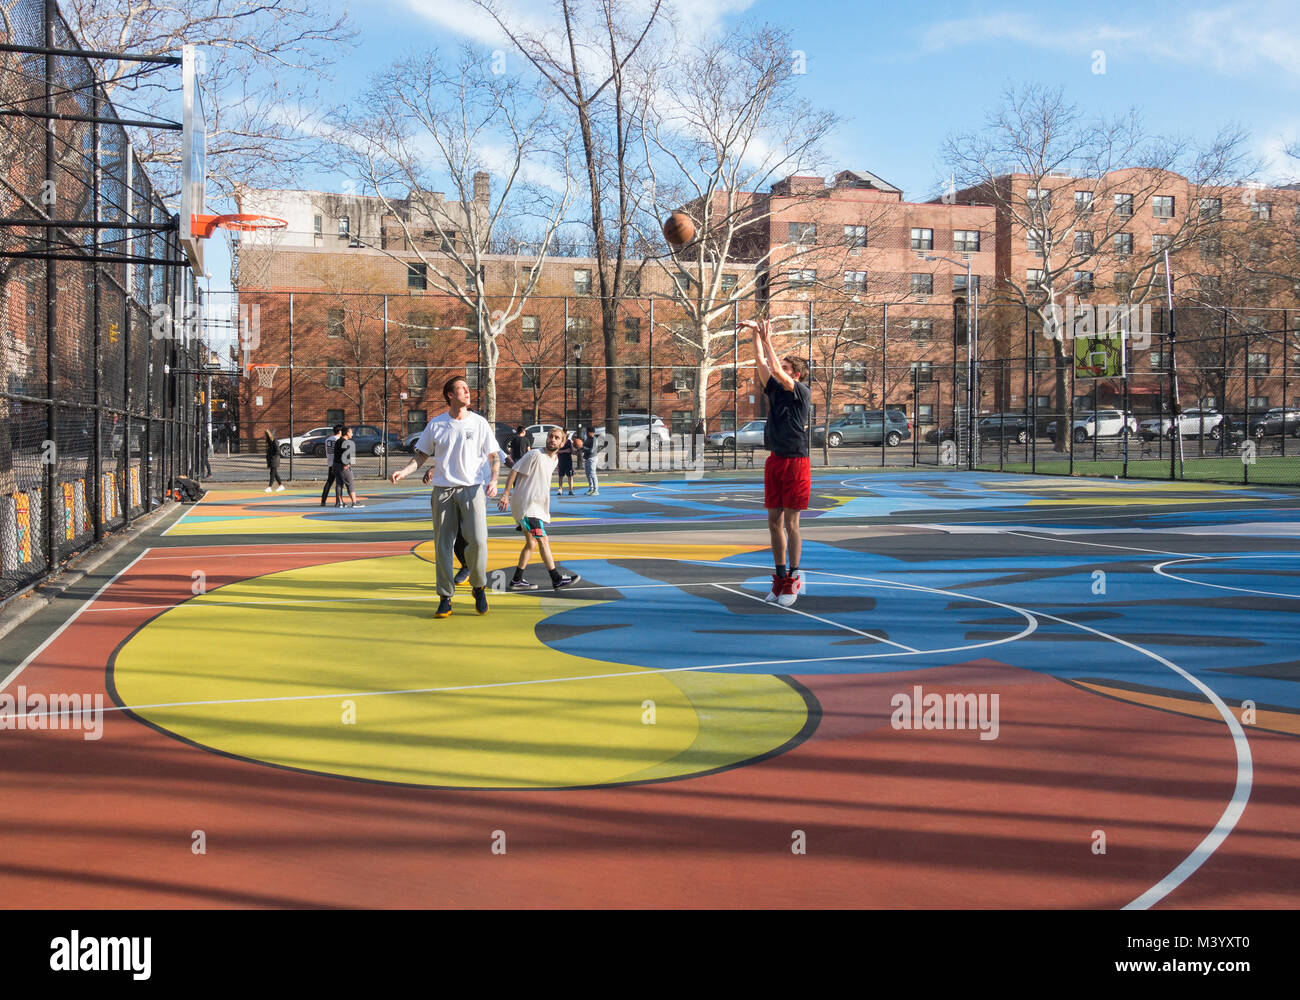 Playground Basketball High Resolution Stock Photography and Images - Alamy